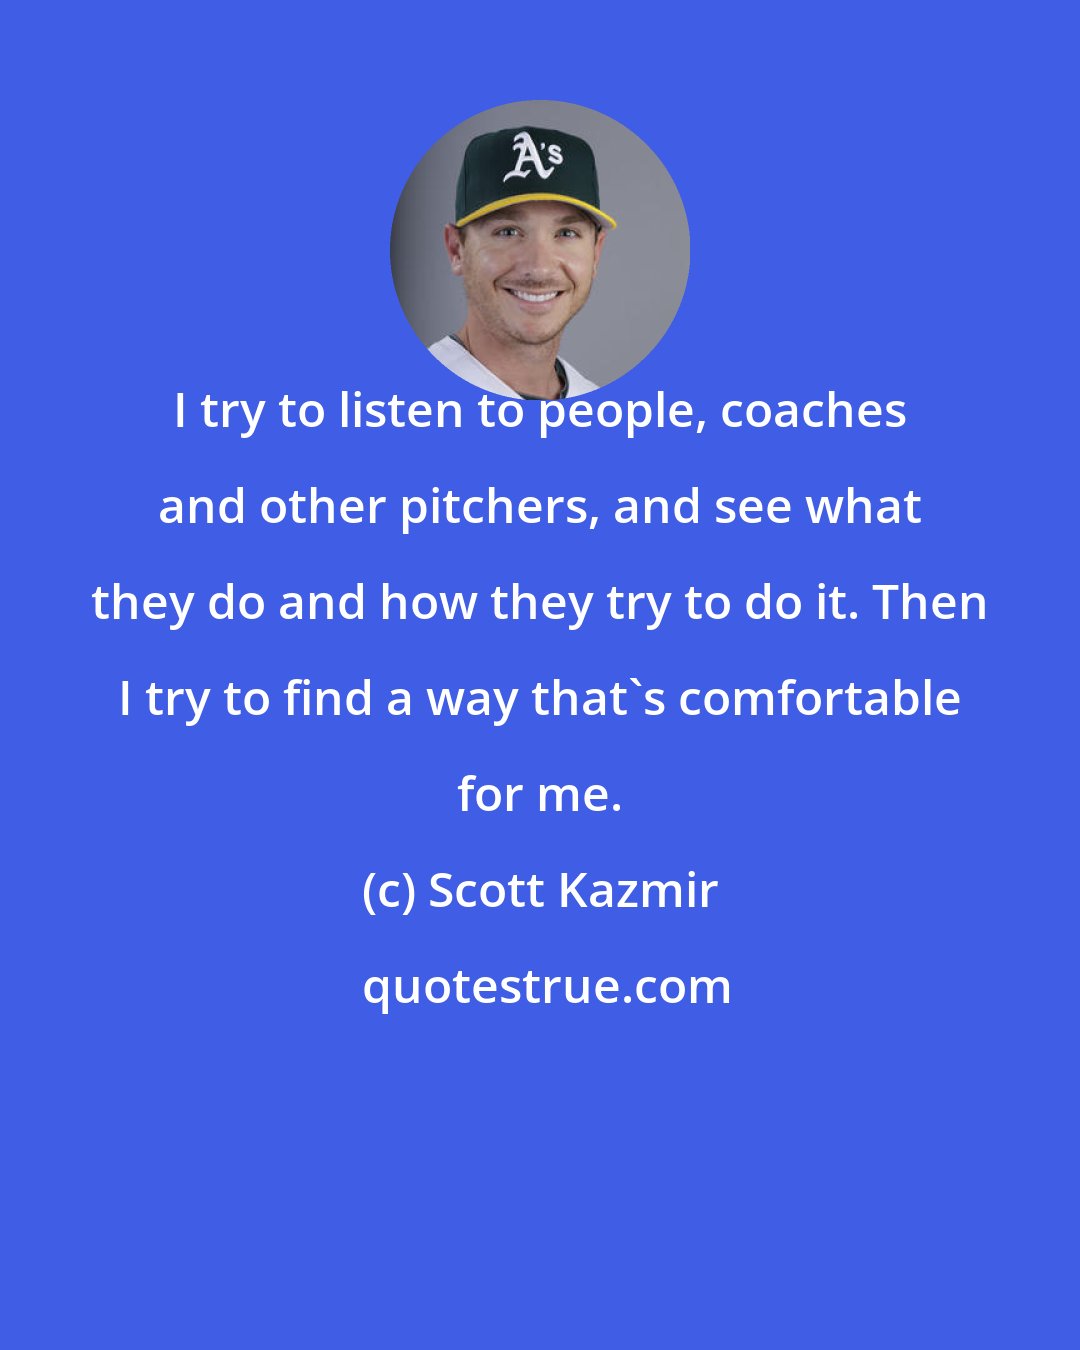 Scott Kazmir: I try to listen to people, coaches and other pitchers, and see what they do and how they try to do it. Then I try to find a way that's comfortable for me.